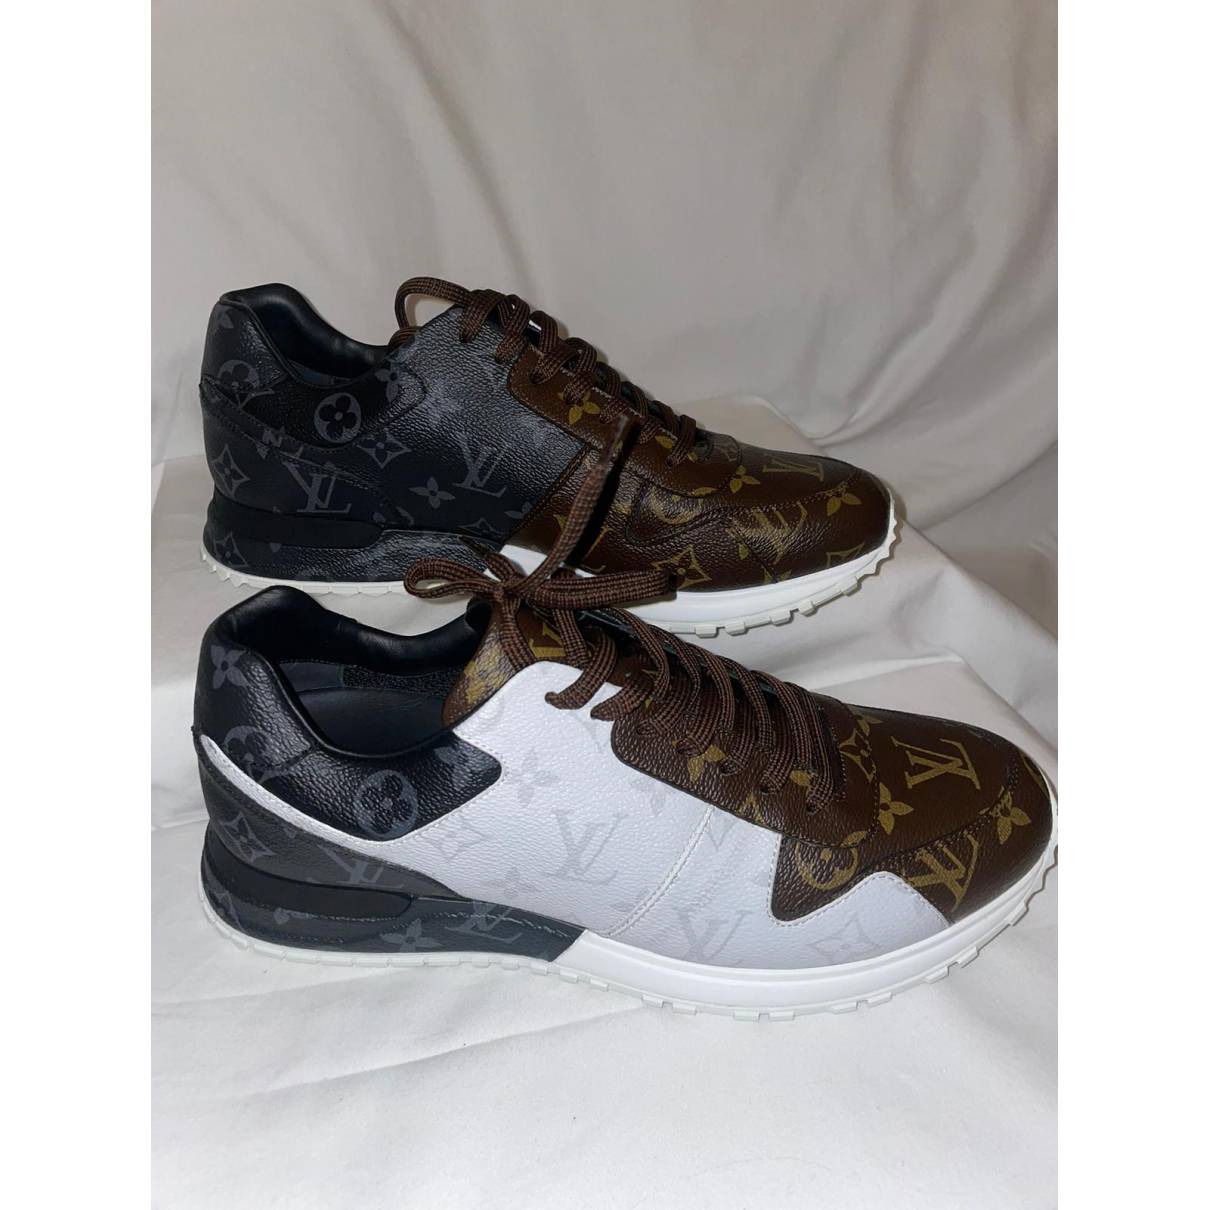 Lv trainer leather low trainers Louis Vuitton Brown size 7 UK in